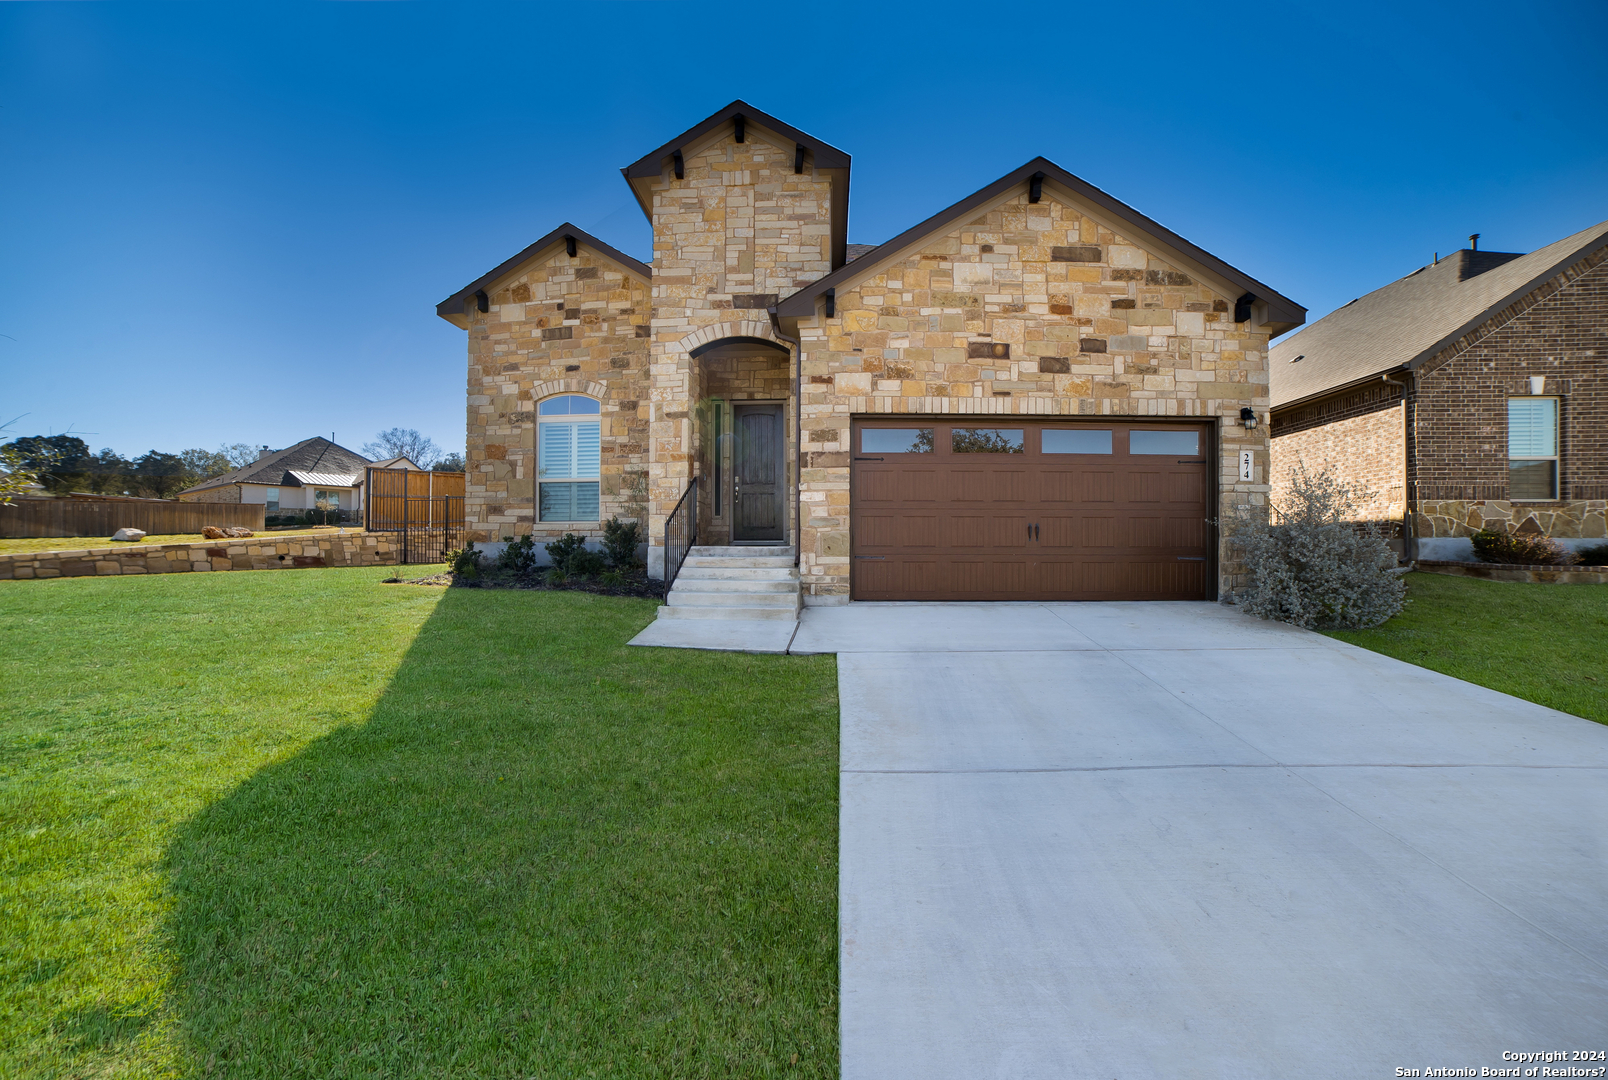 Photo of 274 Sigel Ave in New Braunfels, TX